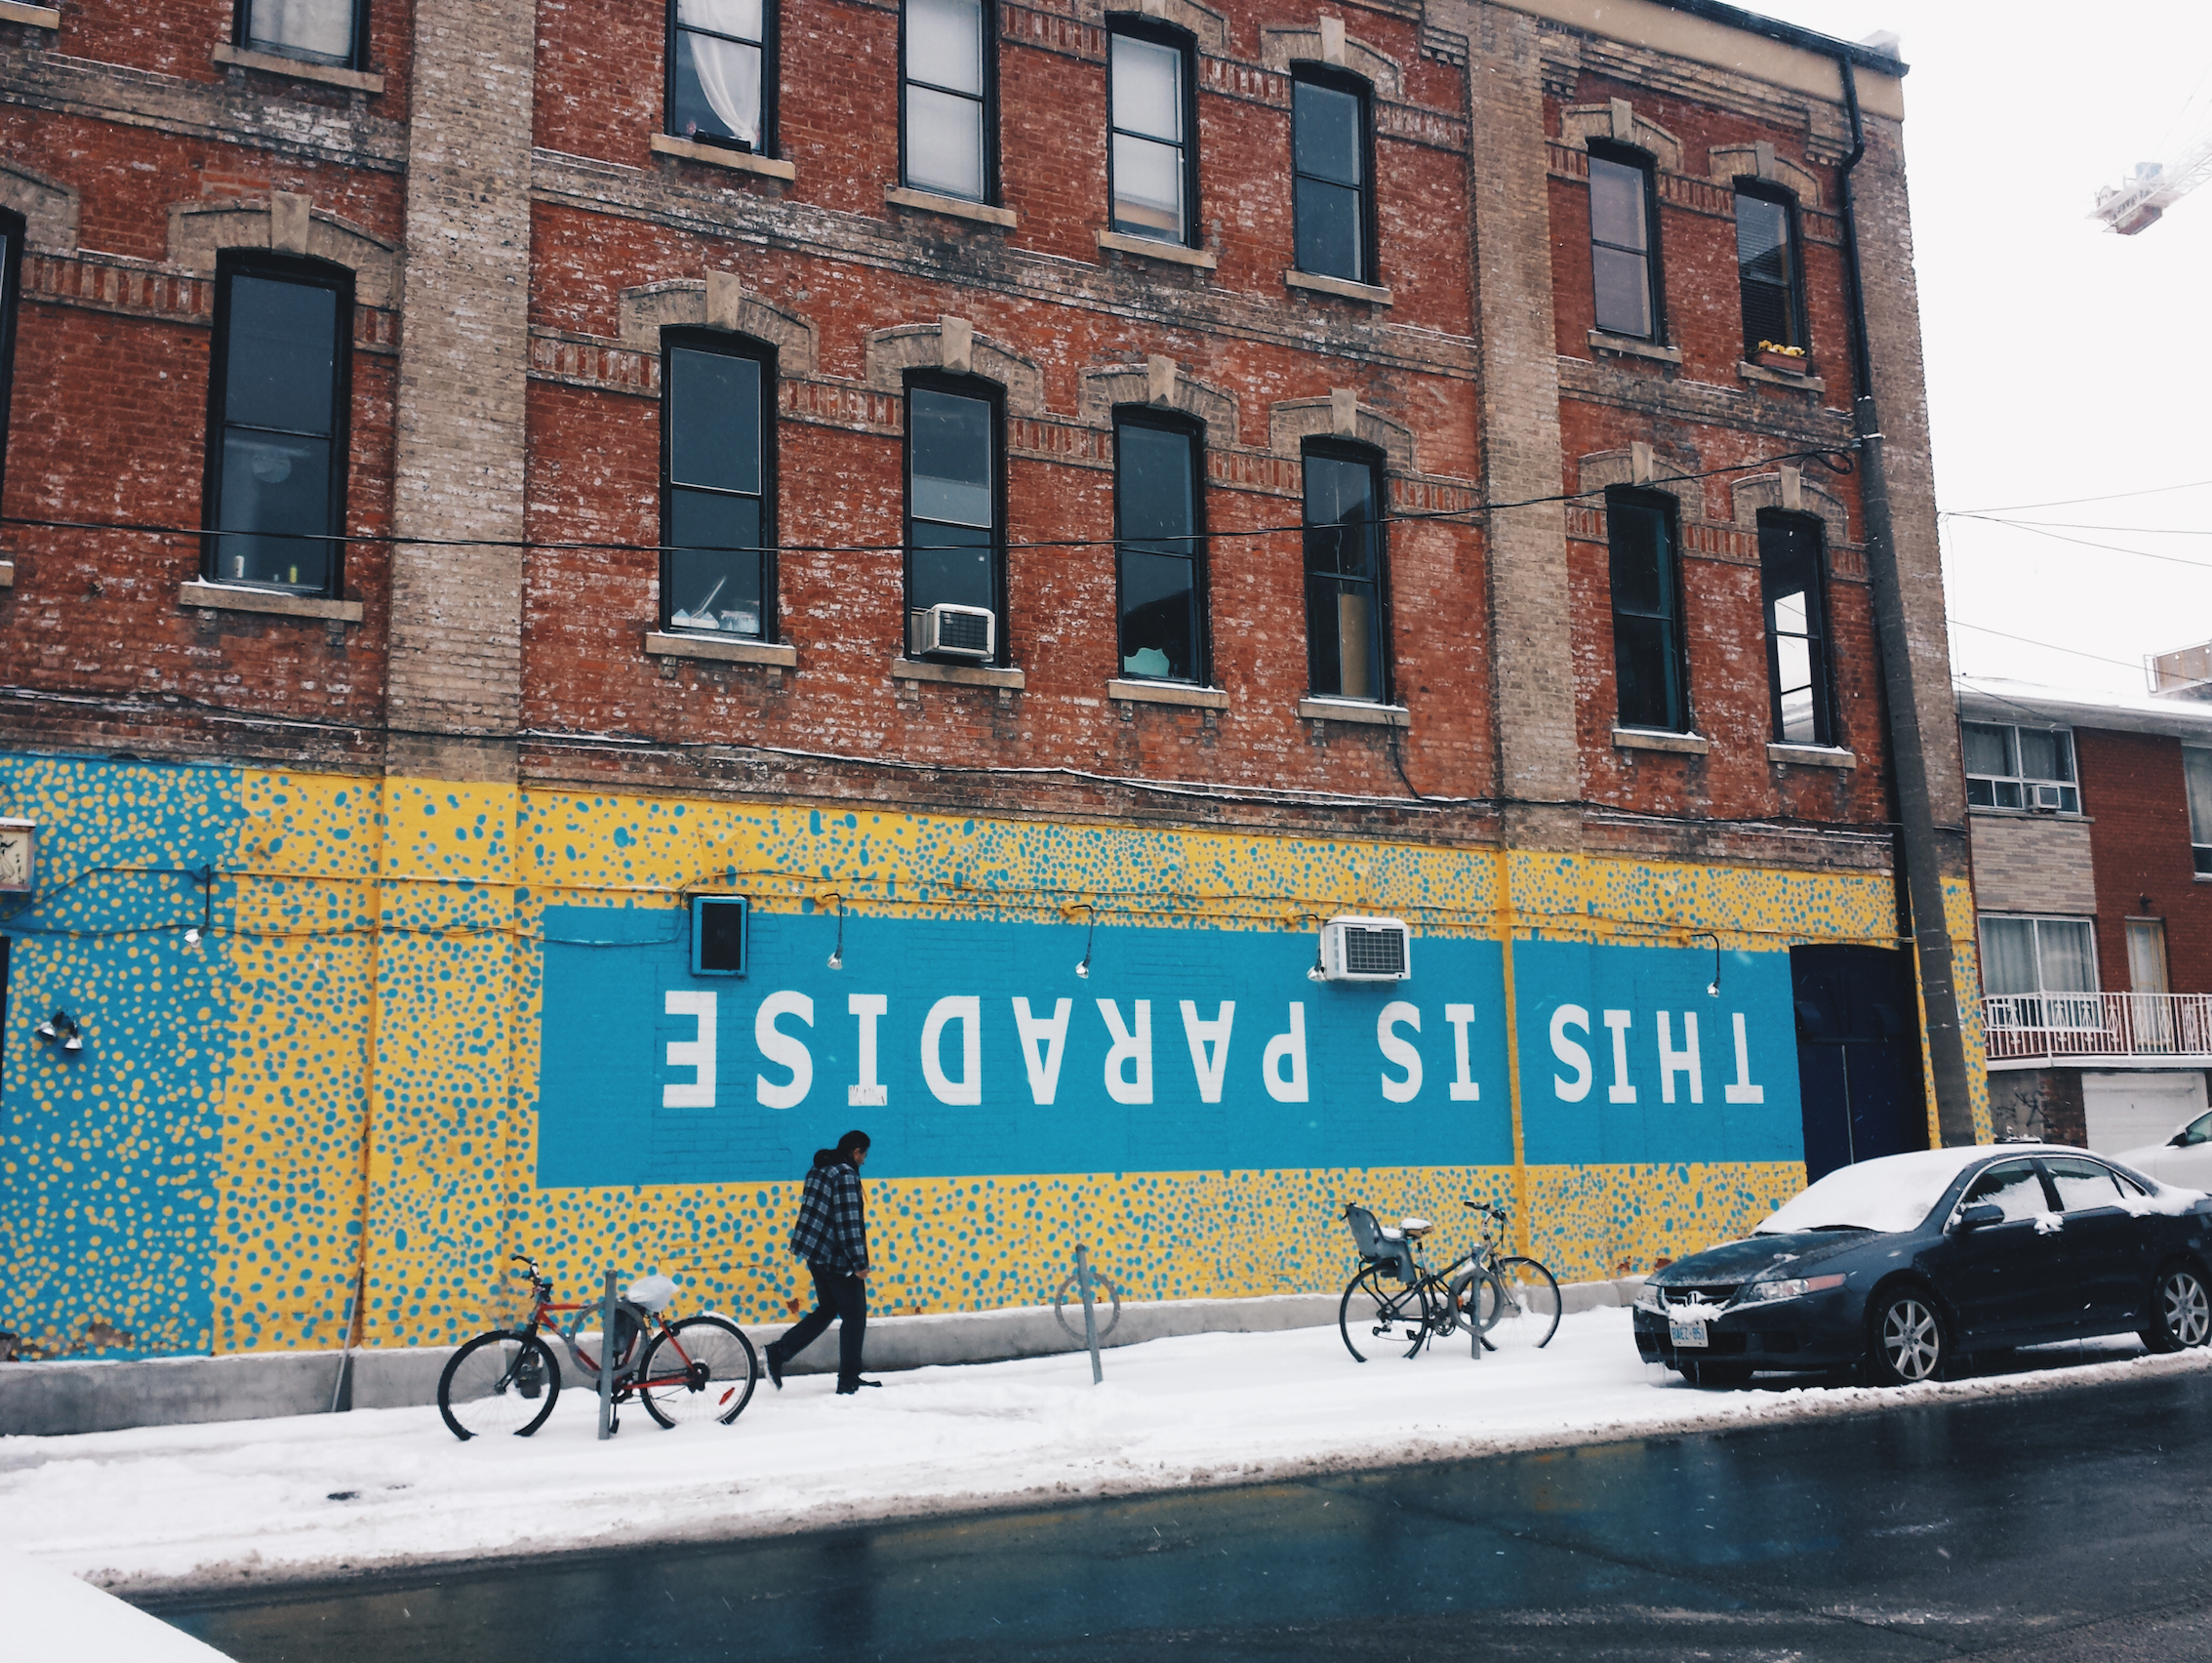 A mural on the side of a building saying "This is paradise." The ground is covered in snow and the sky is particularly grey and bleak